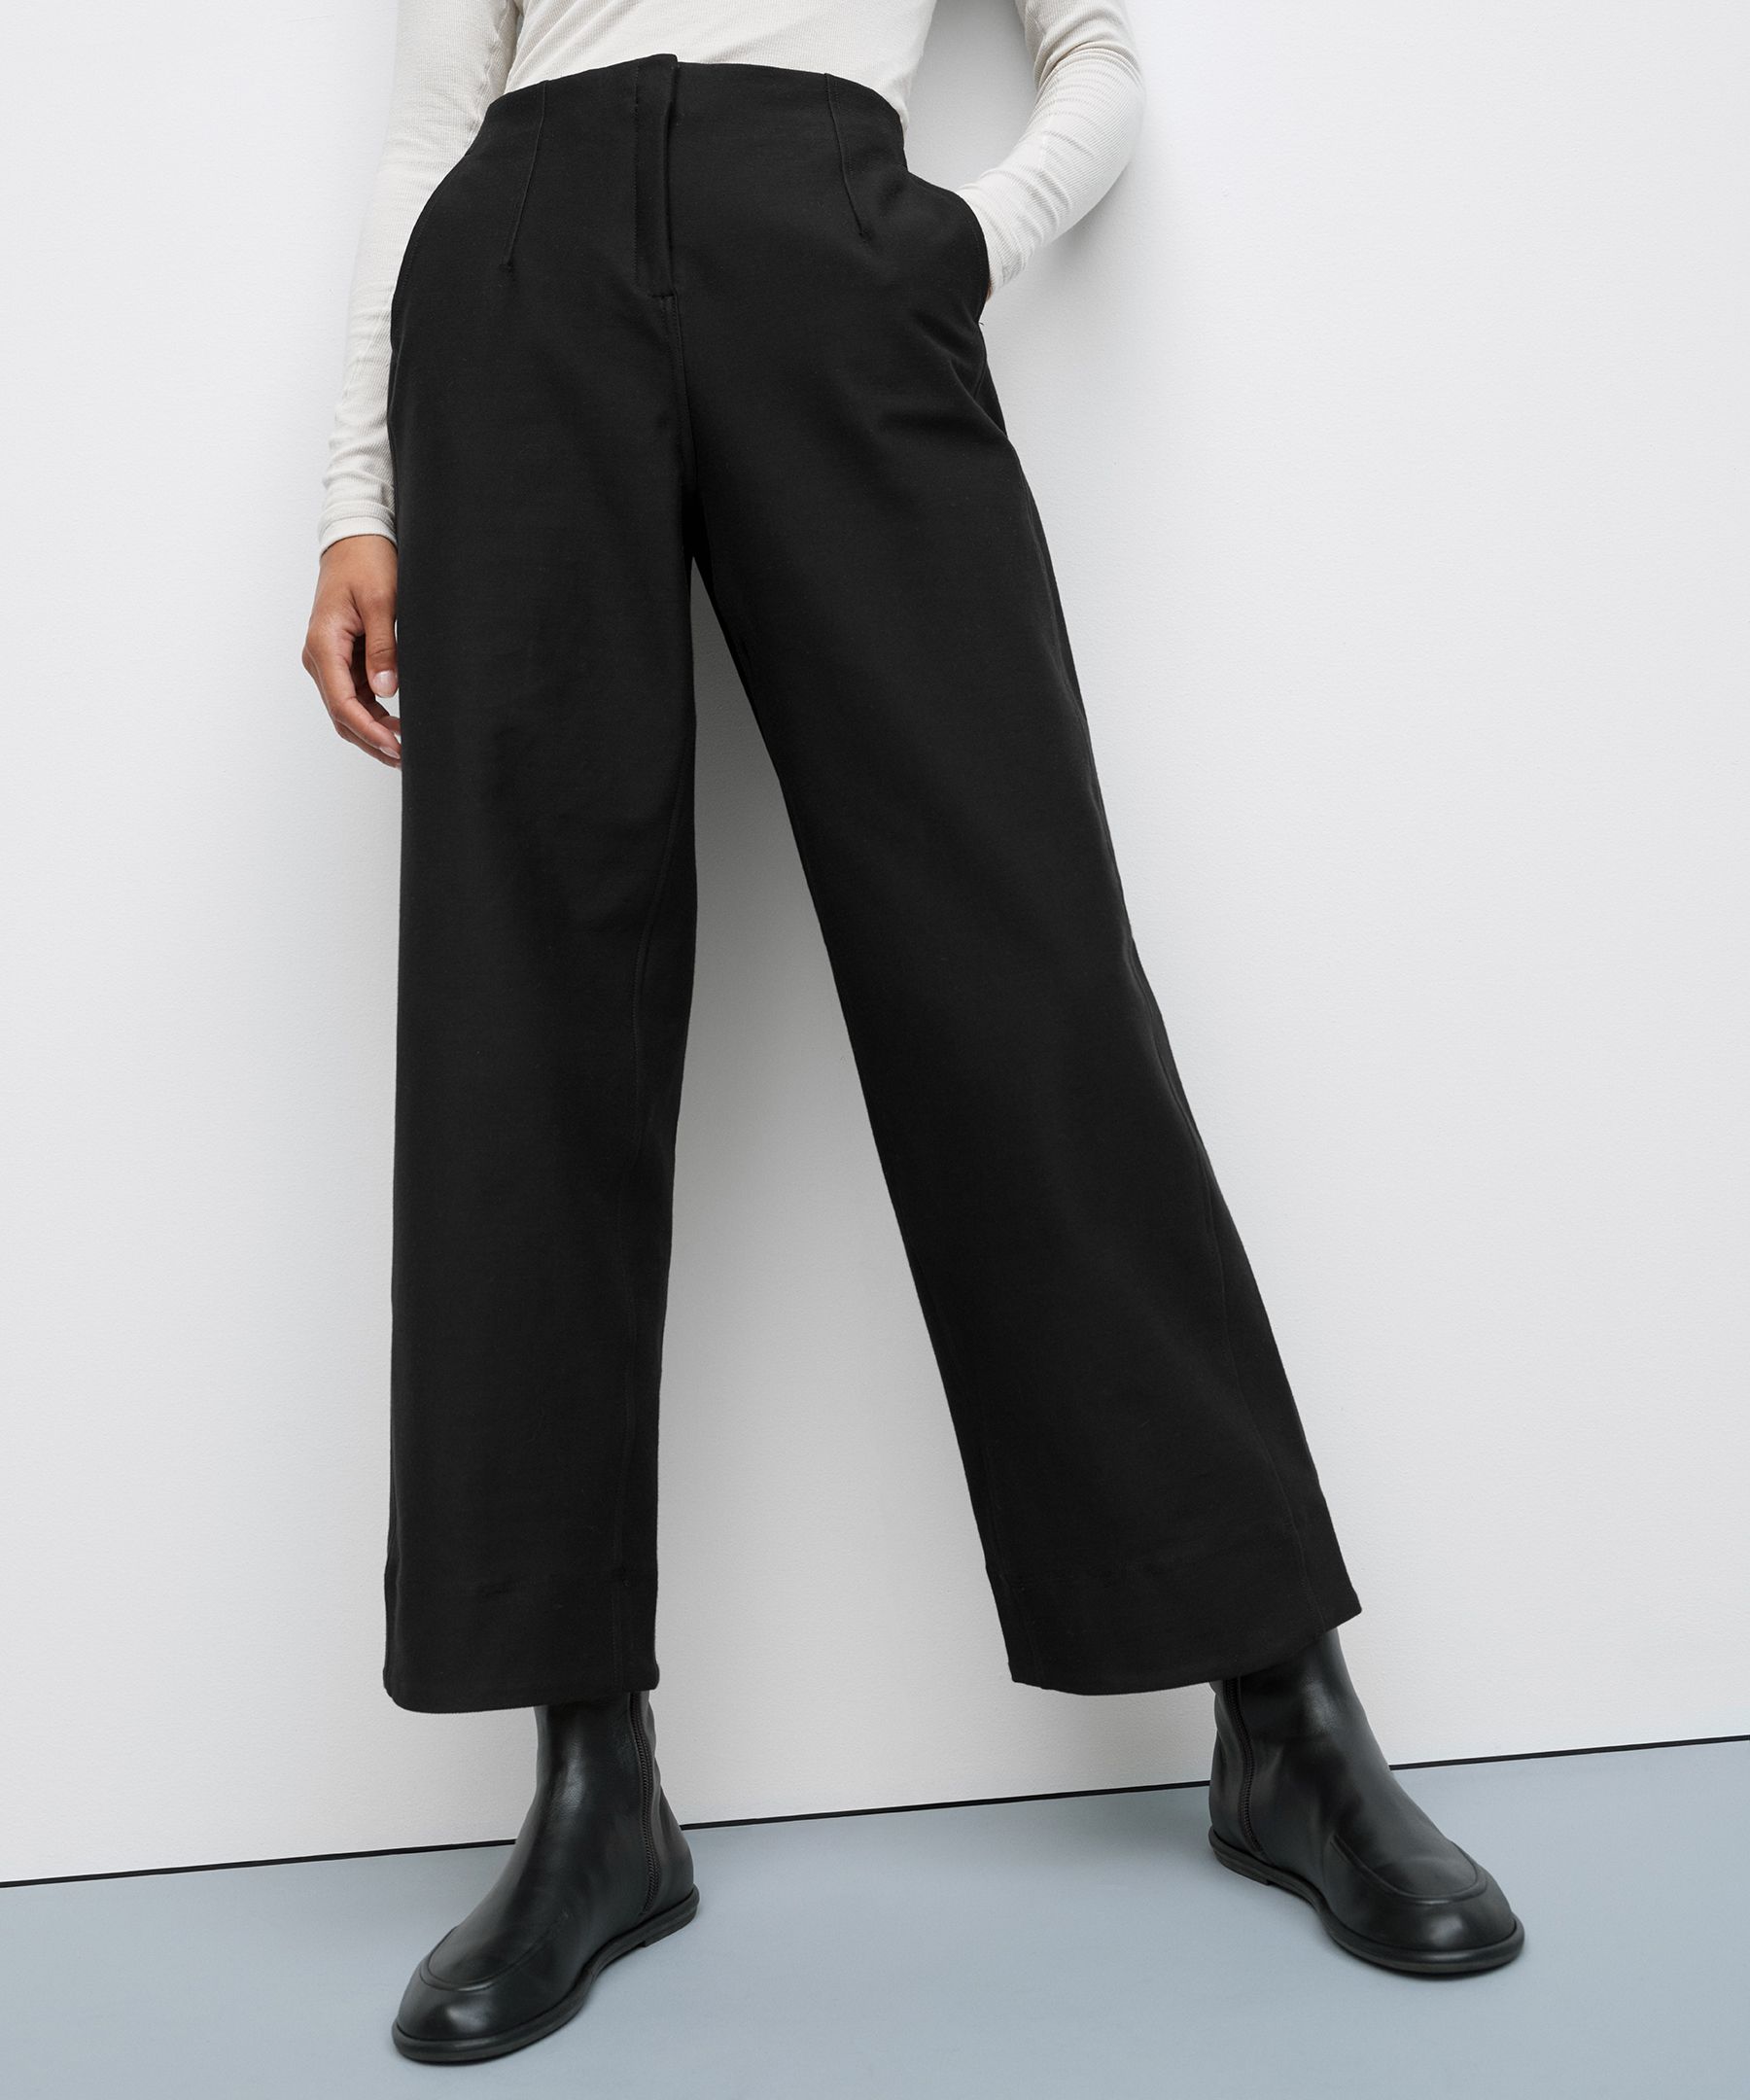 Utilitech Relaxed Mid-Rise Trouser 7/8 Length | Women's Trousers ...